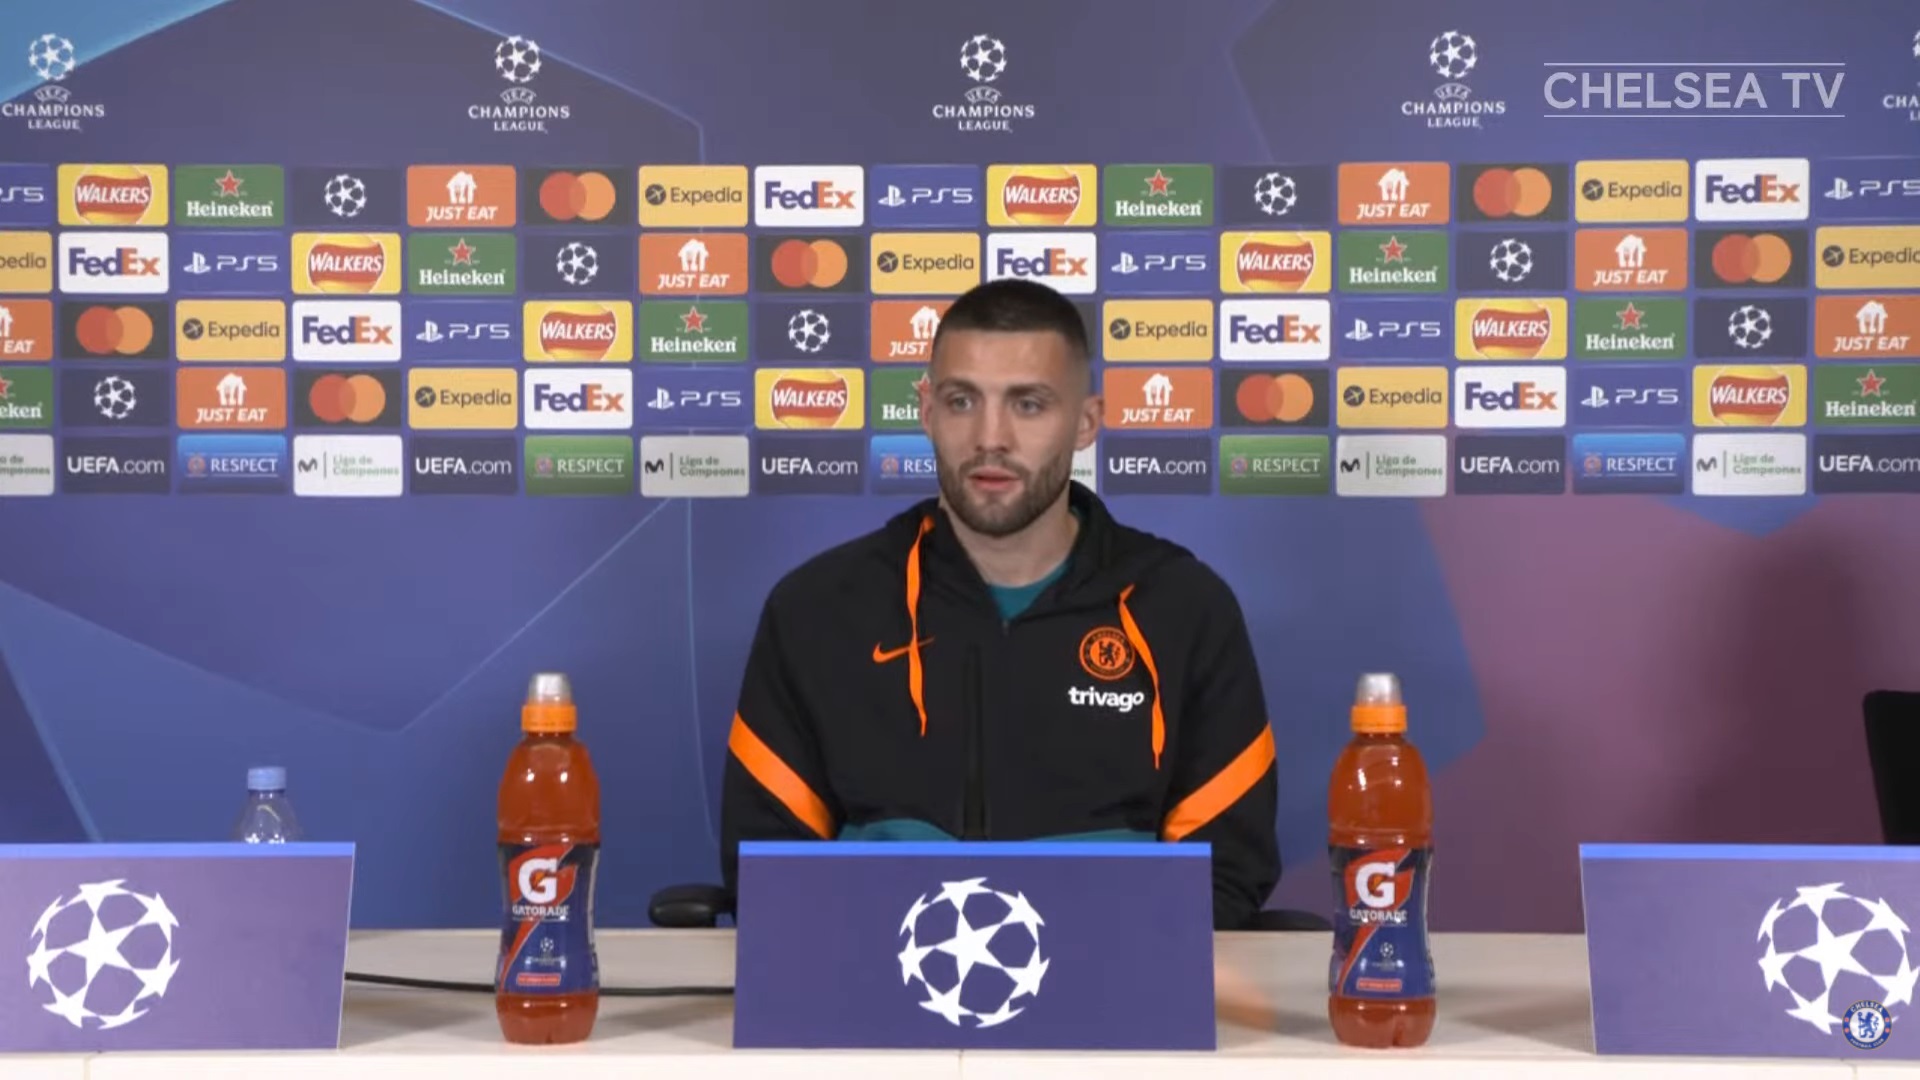 kovacic-press-conference-ahead-of-chelsea-real-madrid